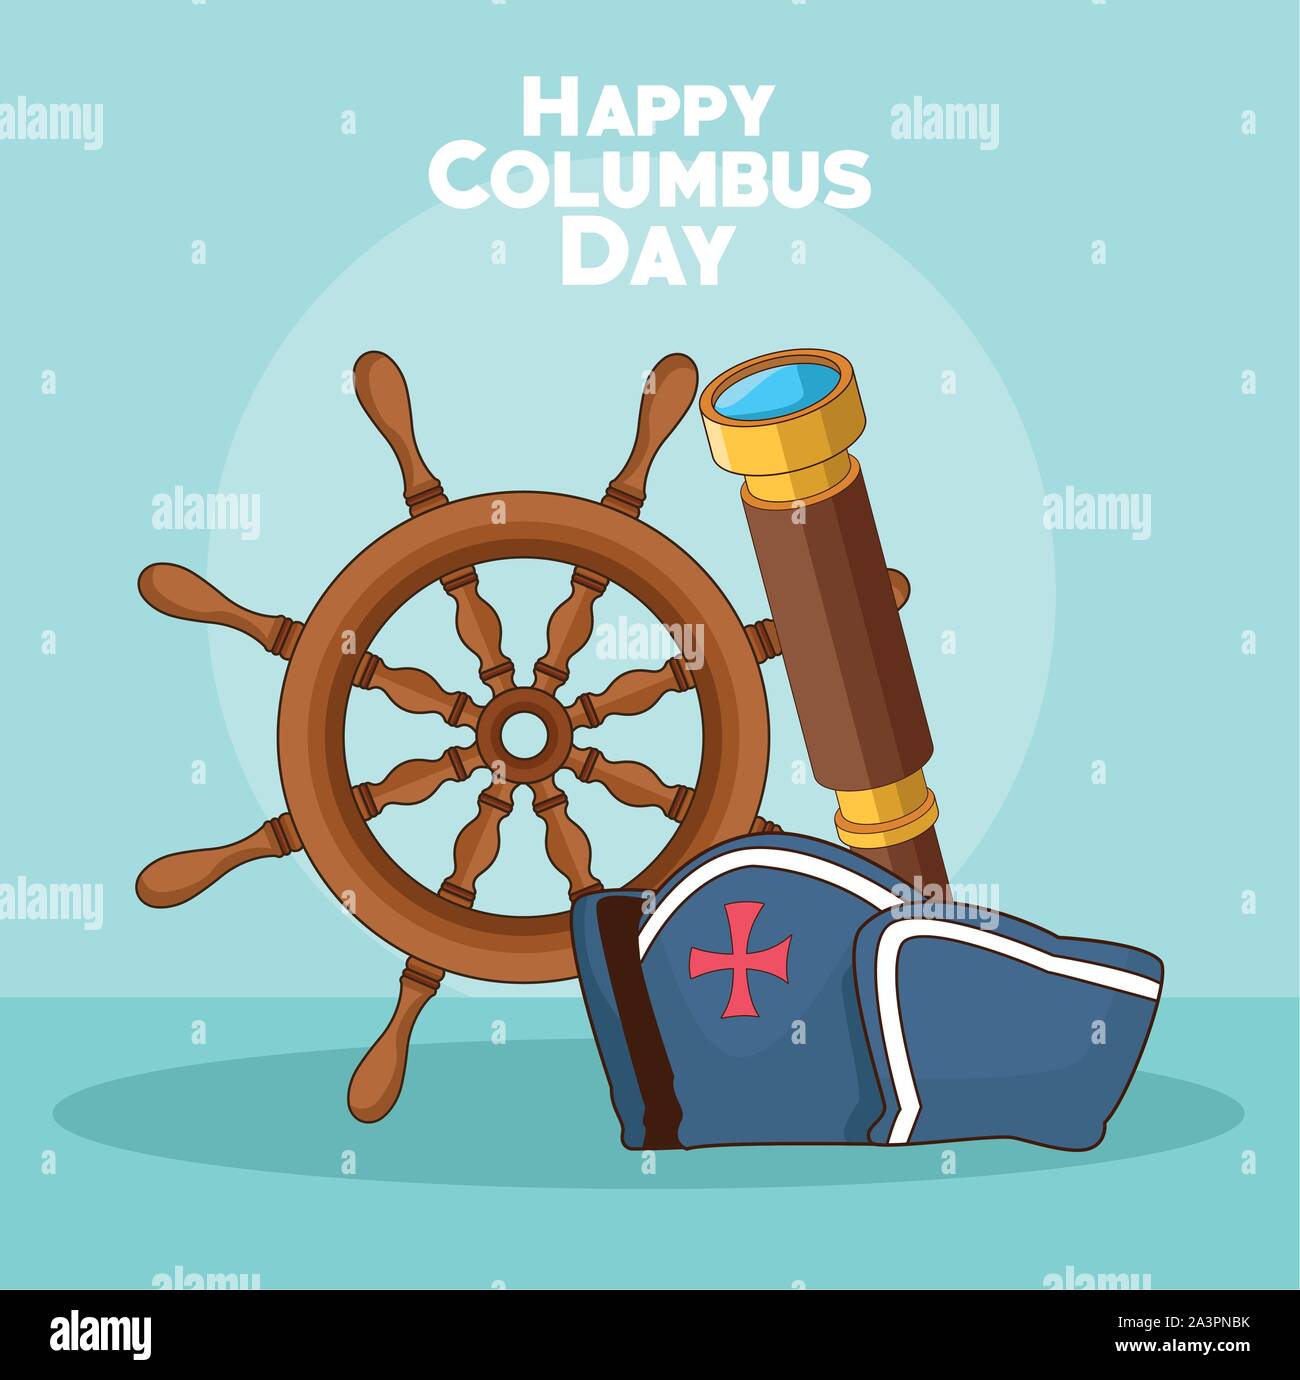 Ship rudder and Happy columbus day design Stock Vector